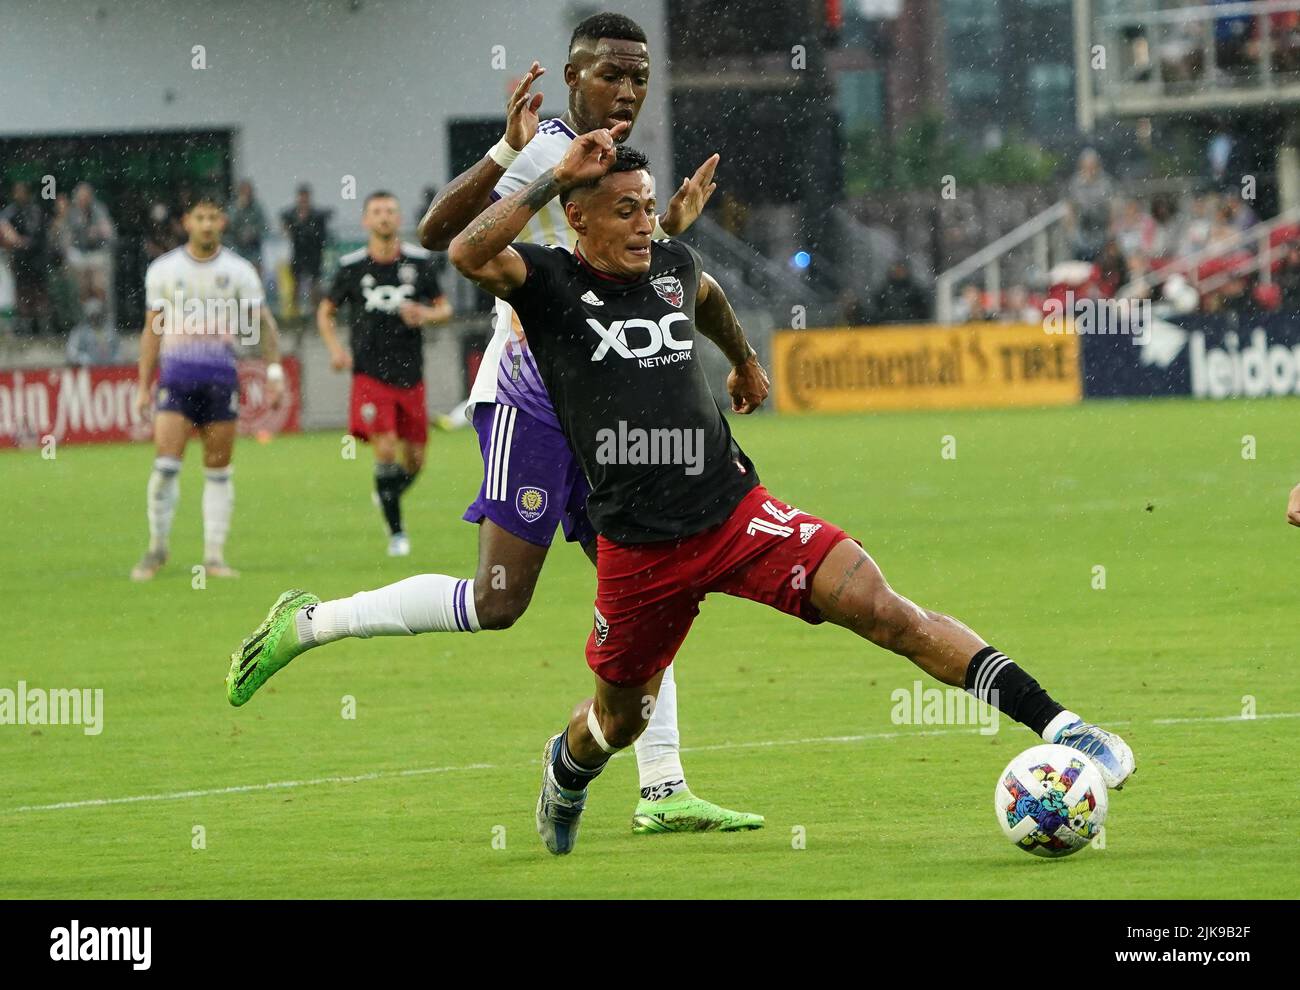 WASHINGTON, DC, USA - 31 JULY 2022: D.C. United midfielder Andy Najar (14) dribbles past Orlando City forward Jack Lynn (27) during a MLS match between D.C United and the Orlando City SC, on July 31, 2022, at Audi Field, in Washington, DC. (Photo by Tony Quinn-Alamy Live News) Stock Photo